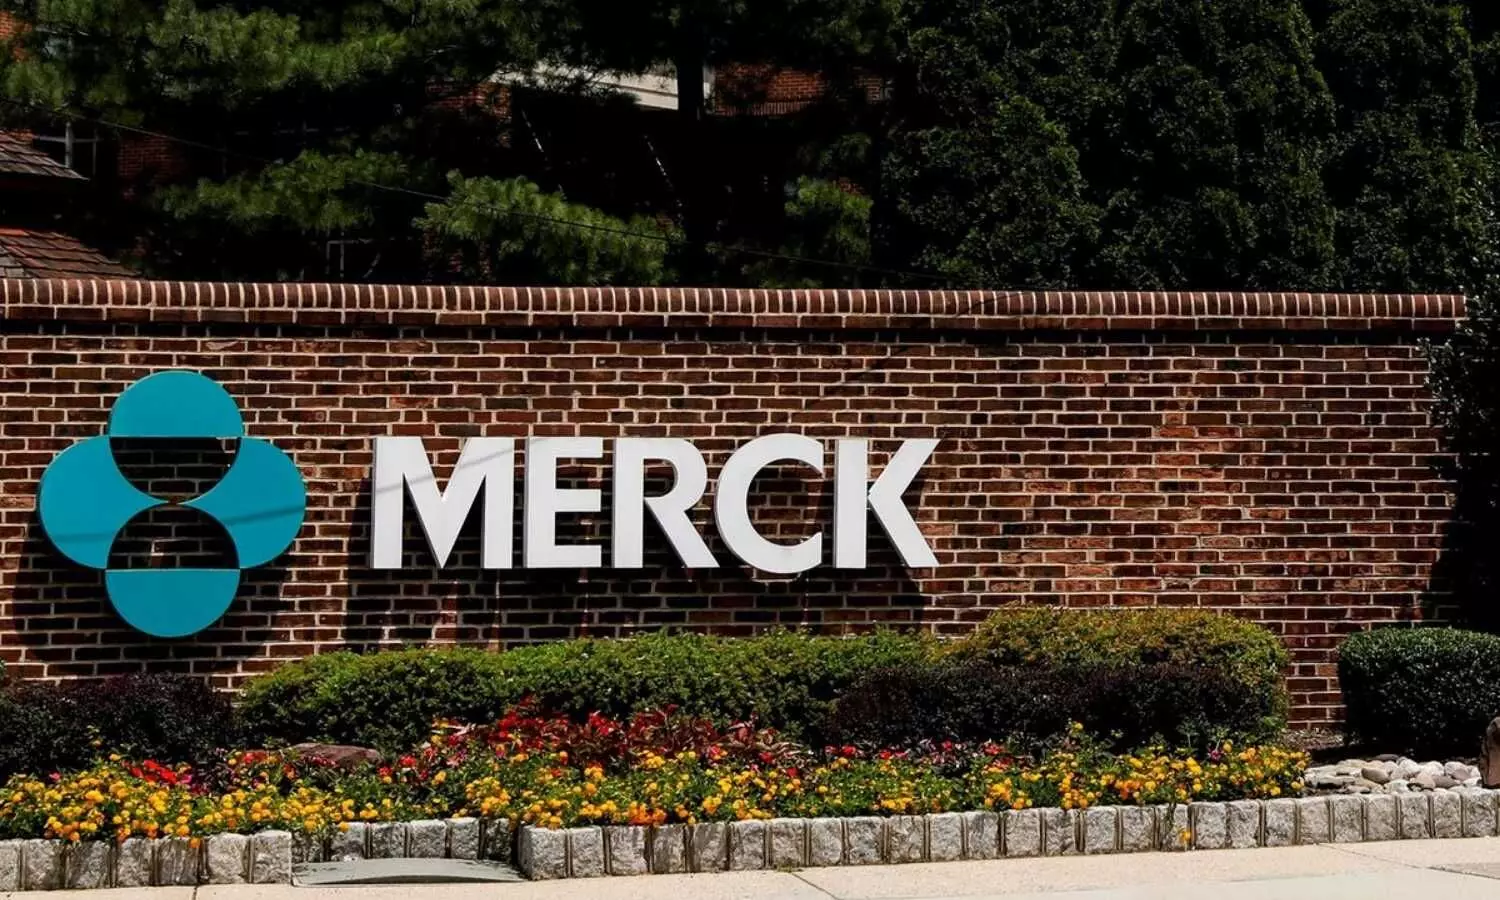 USFDA accepts application for Merck KEYTRUDA plus Chemotherapy as first line treatment for Locally Advanced Unresectable or Metastatic Gastric or Gastroesophageal Junction Adenocarcinoma